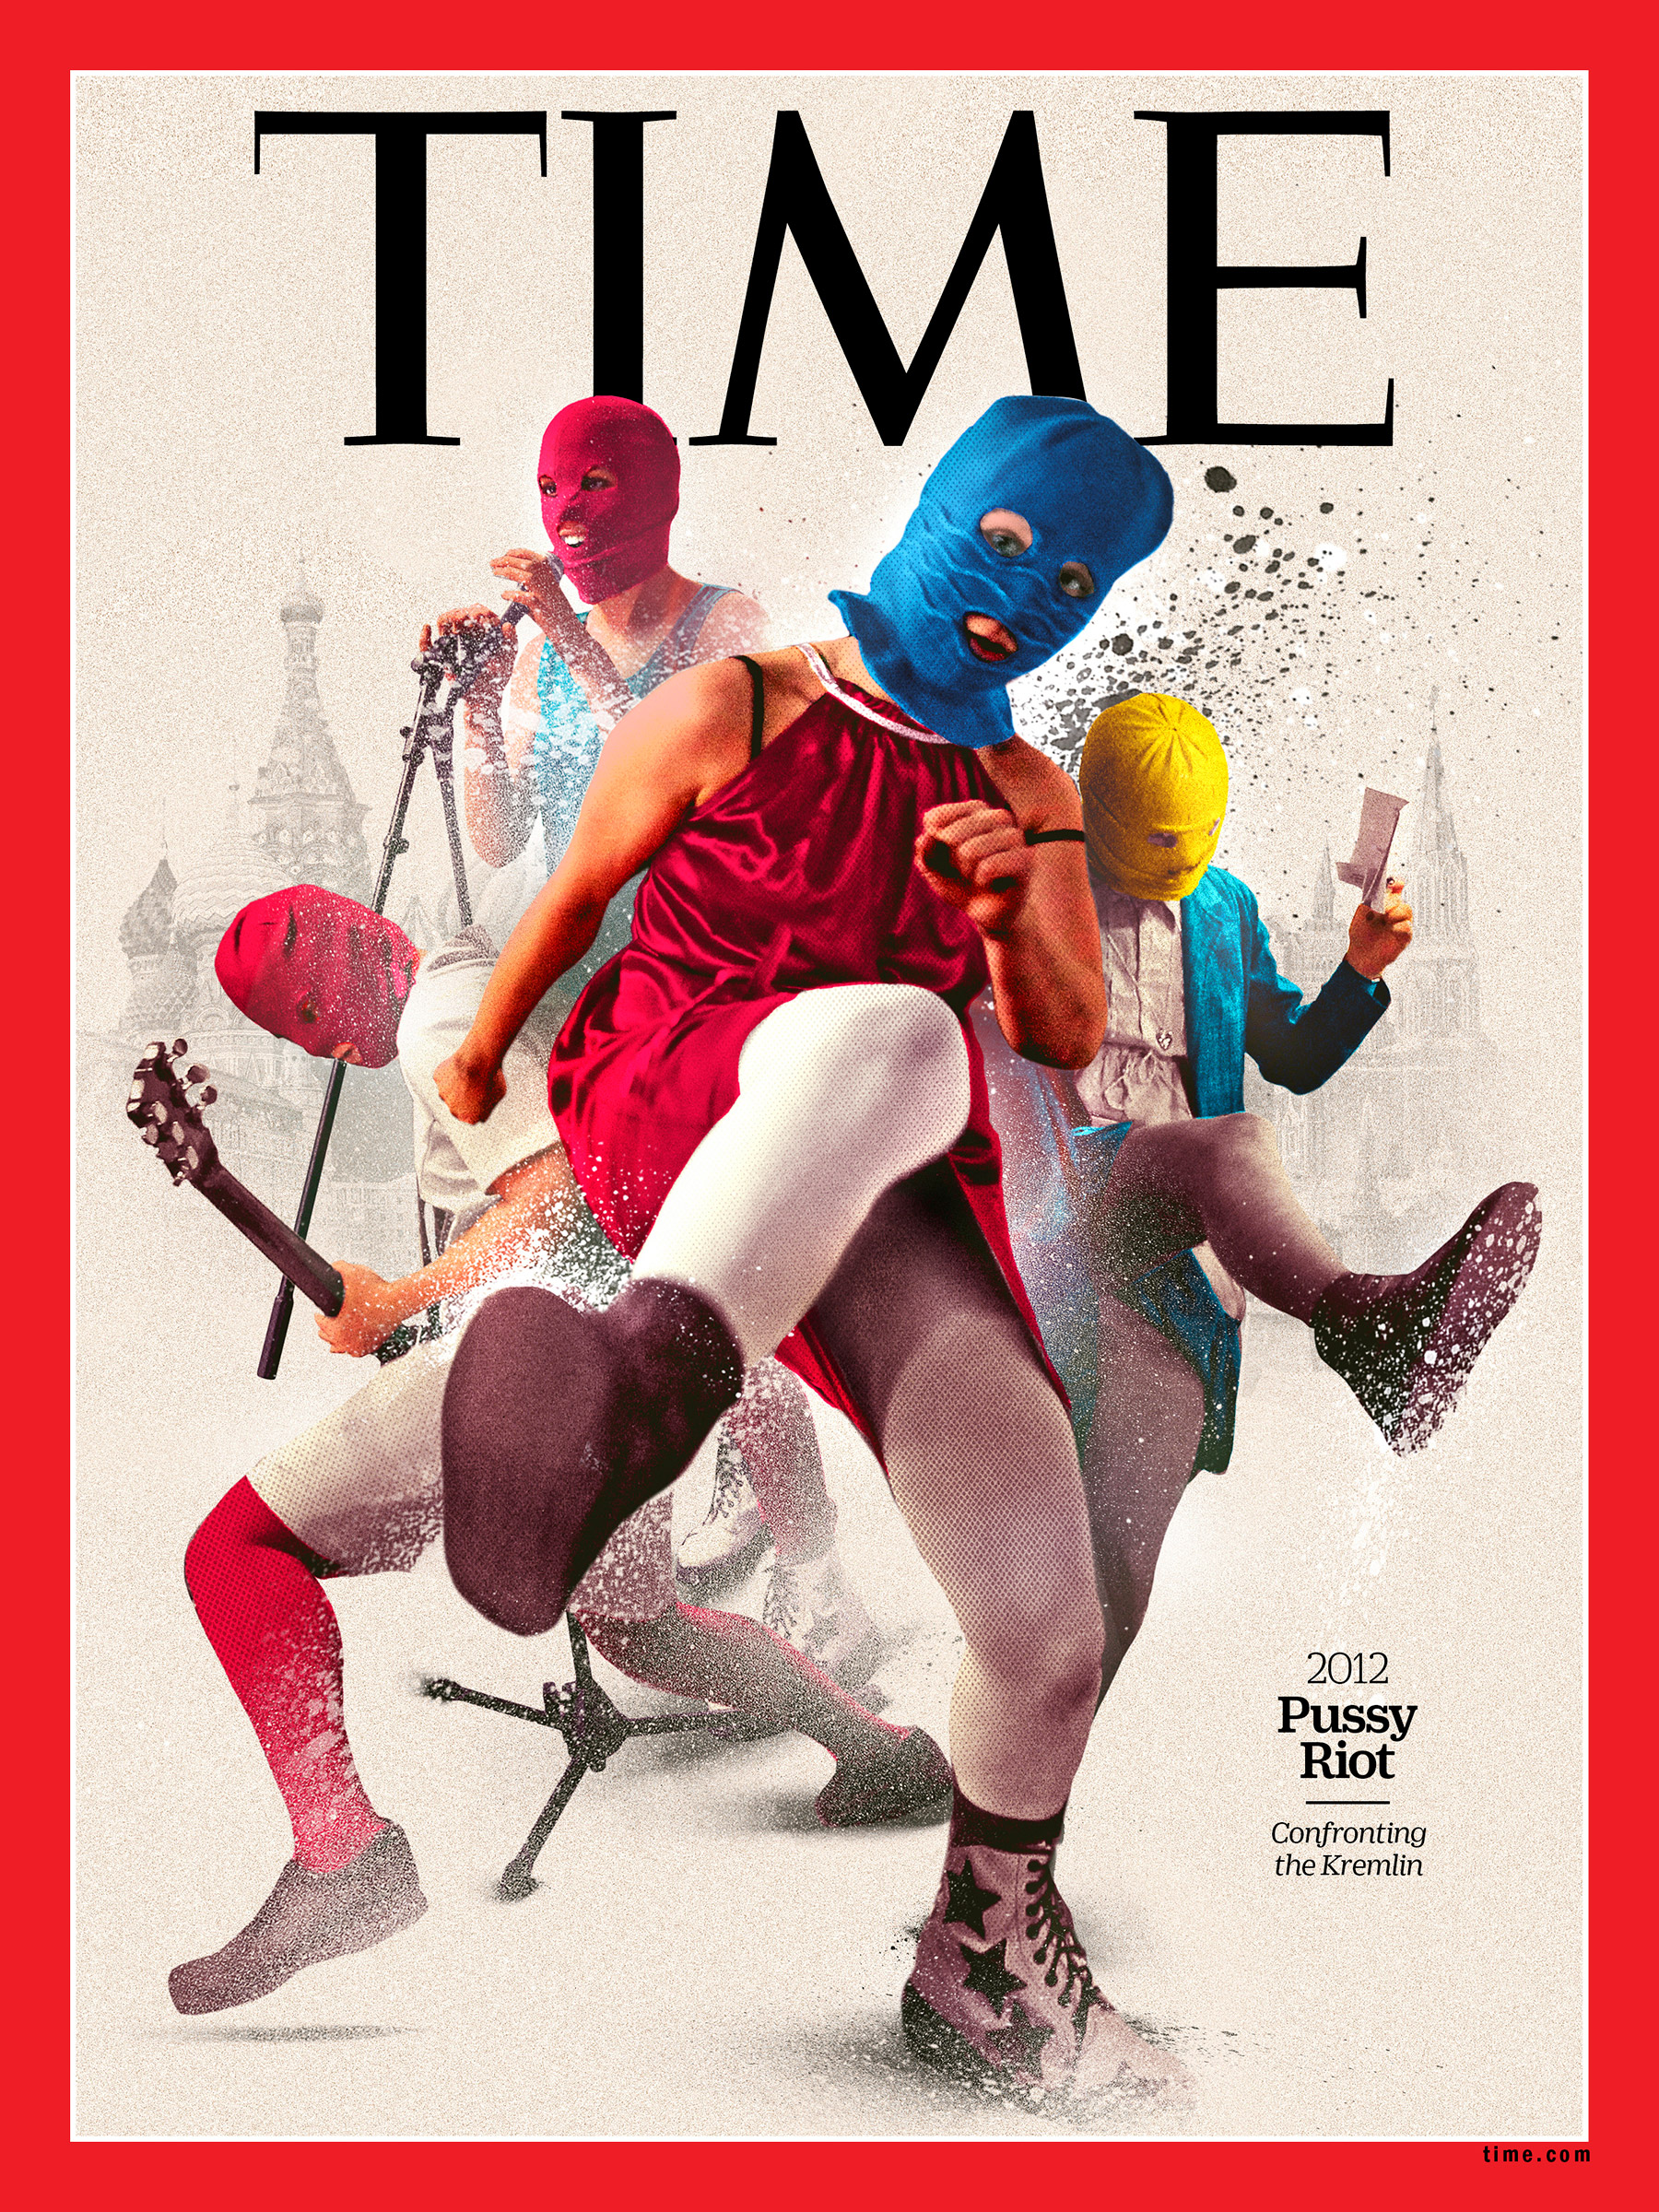 <a href="https://fineartamerica.com/featured/pussy-riot-2012-time.html"><strong>Buy the cover art→</strong></a> (Illustration by Neil Jamieson for TIME; Sergey Ponomarev—AP)